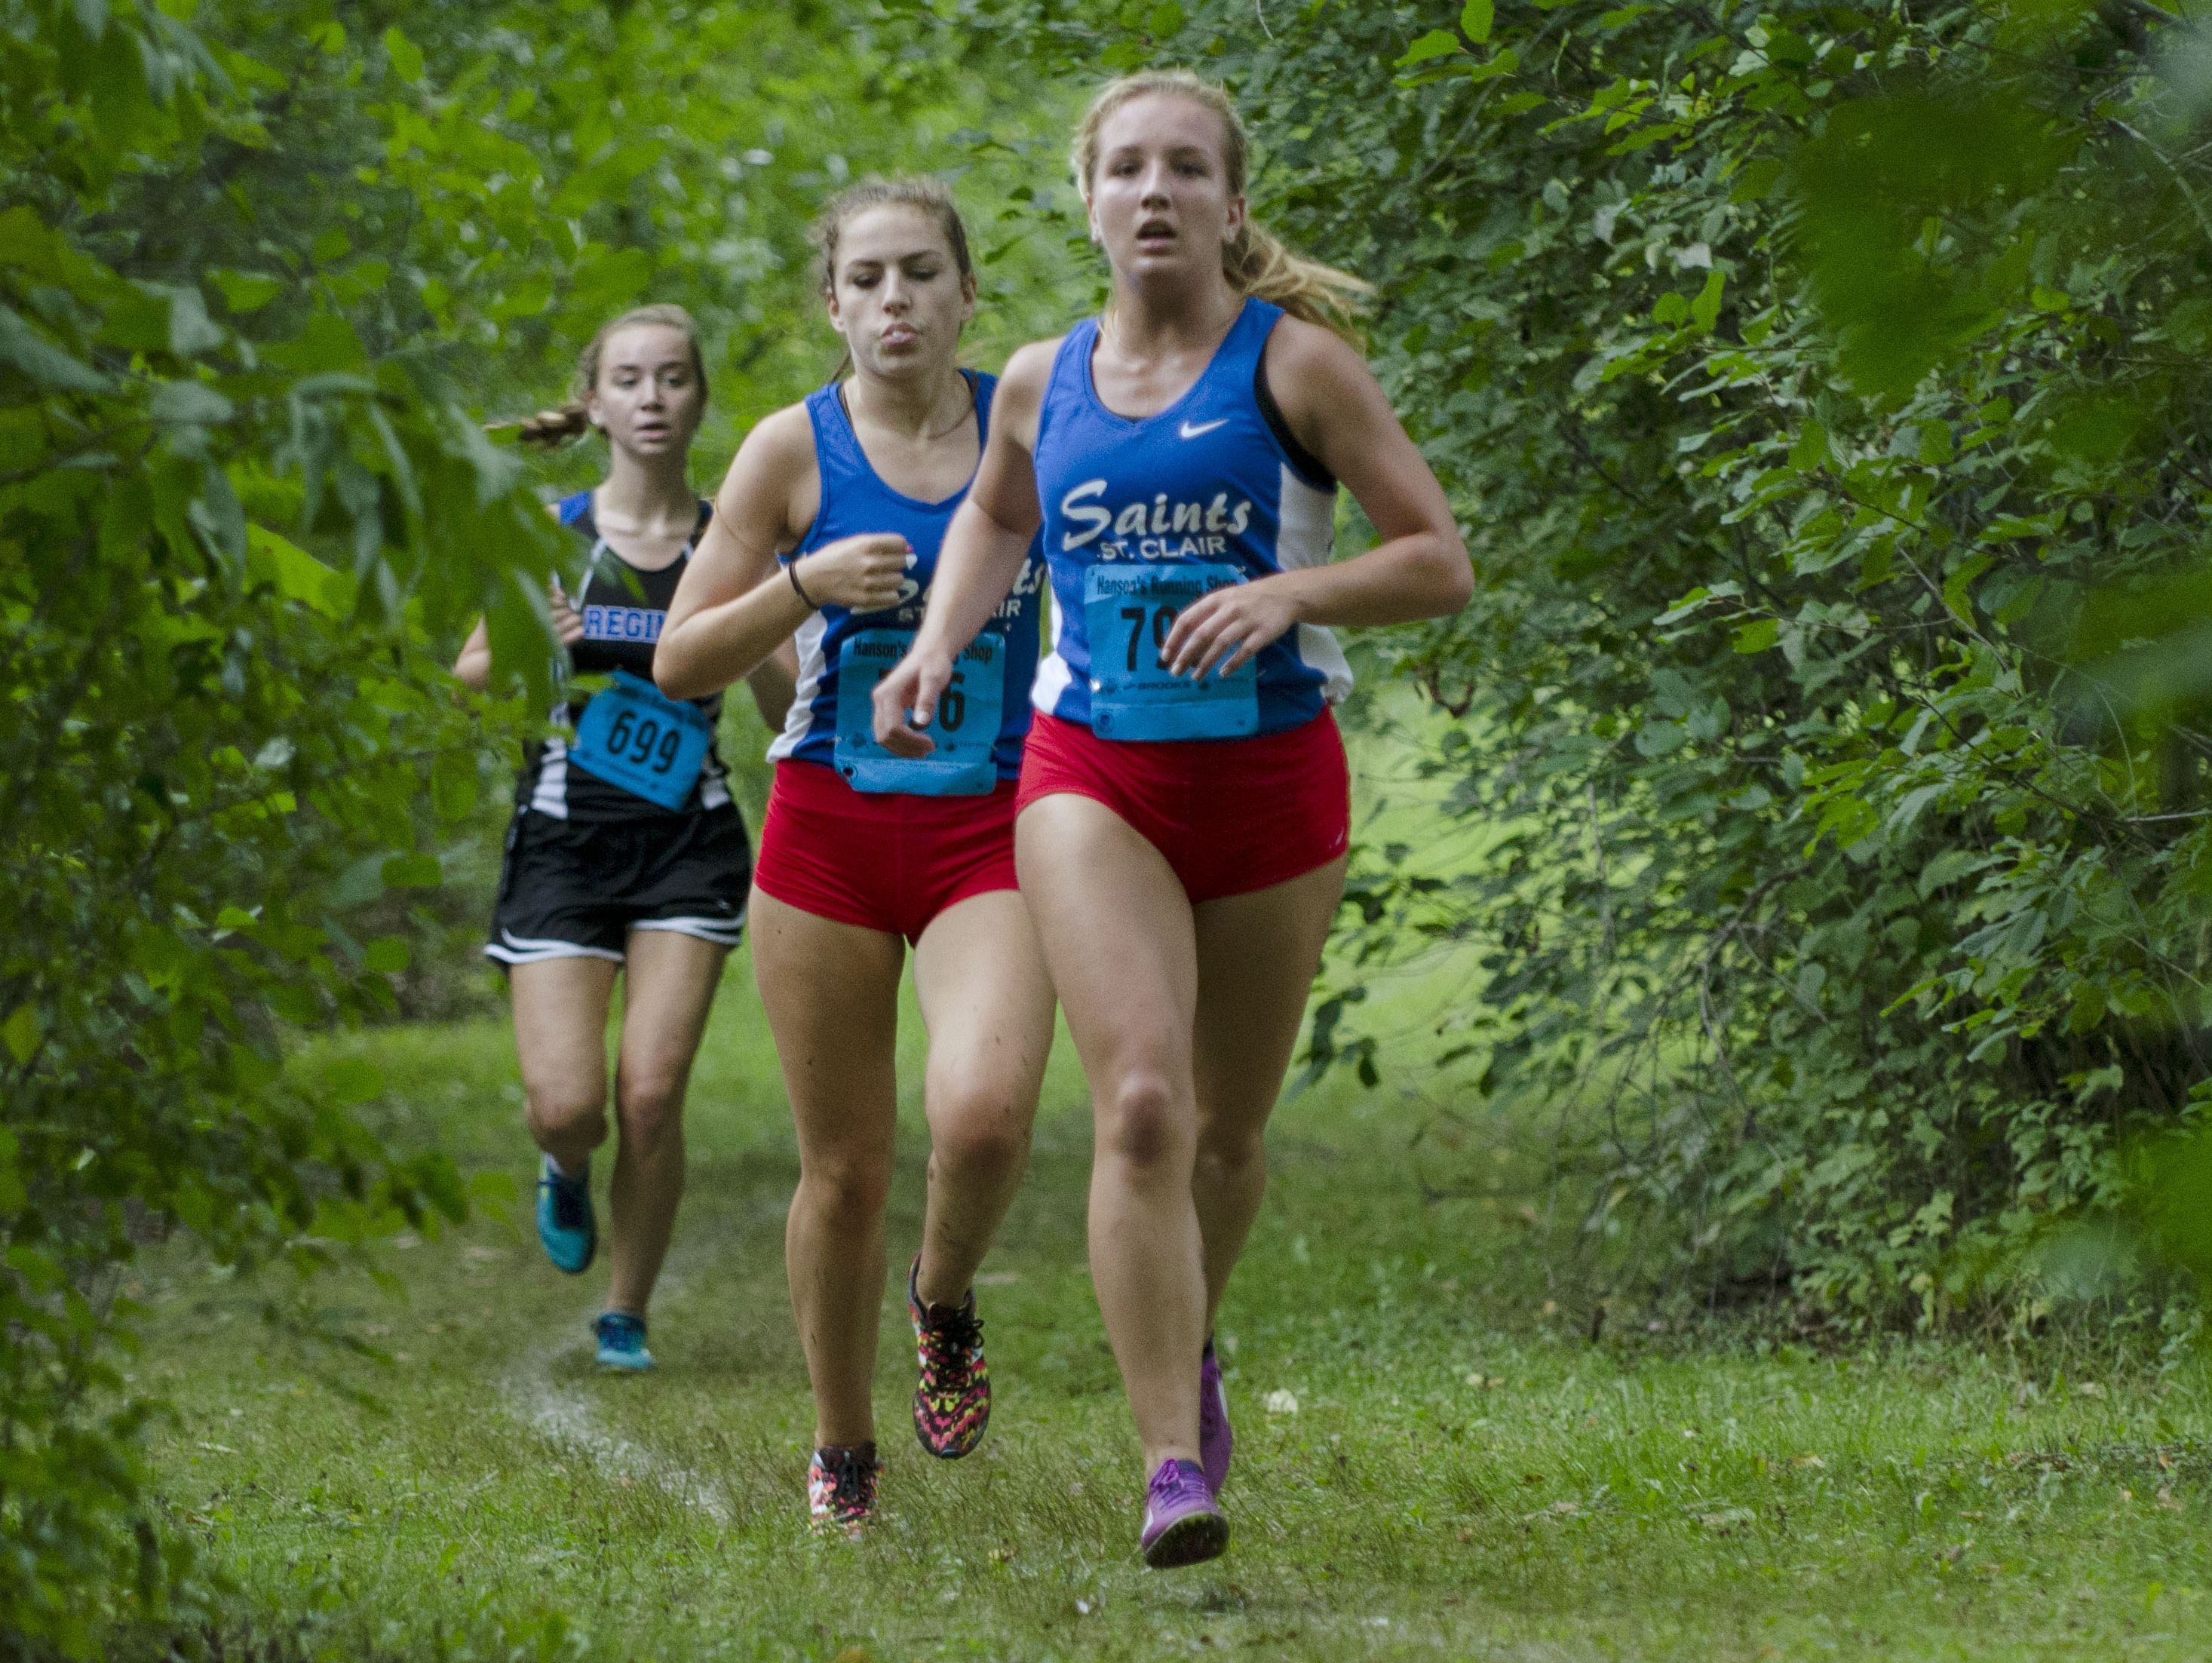 St. Clair's Morgan Markel leads a pack including her teammate Gabrielle Morton, right, Saturday, Sept. 10 at the Algonac Muskrat Cross Country Classic at Algonac High School. Markel finished second with a time of 20:18 and Morton finished first with a time of 20:12